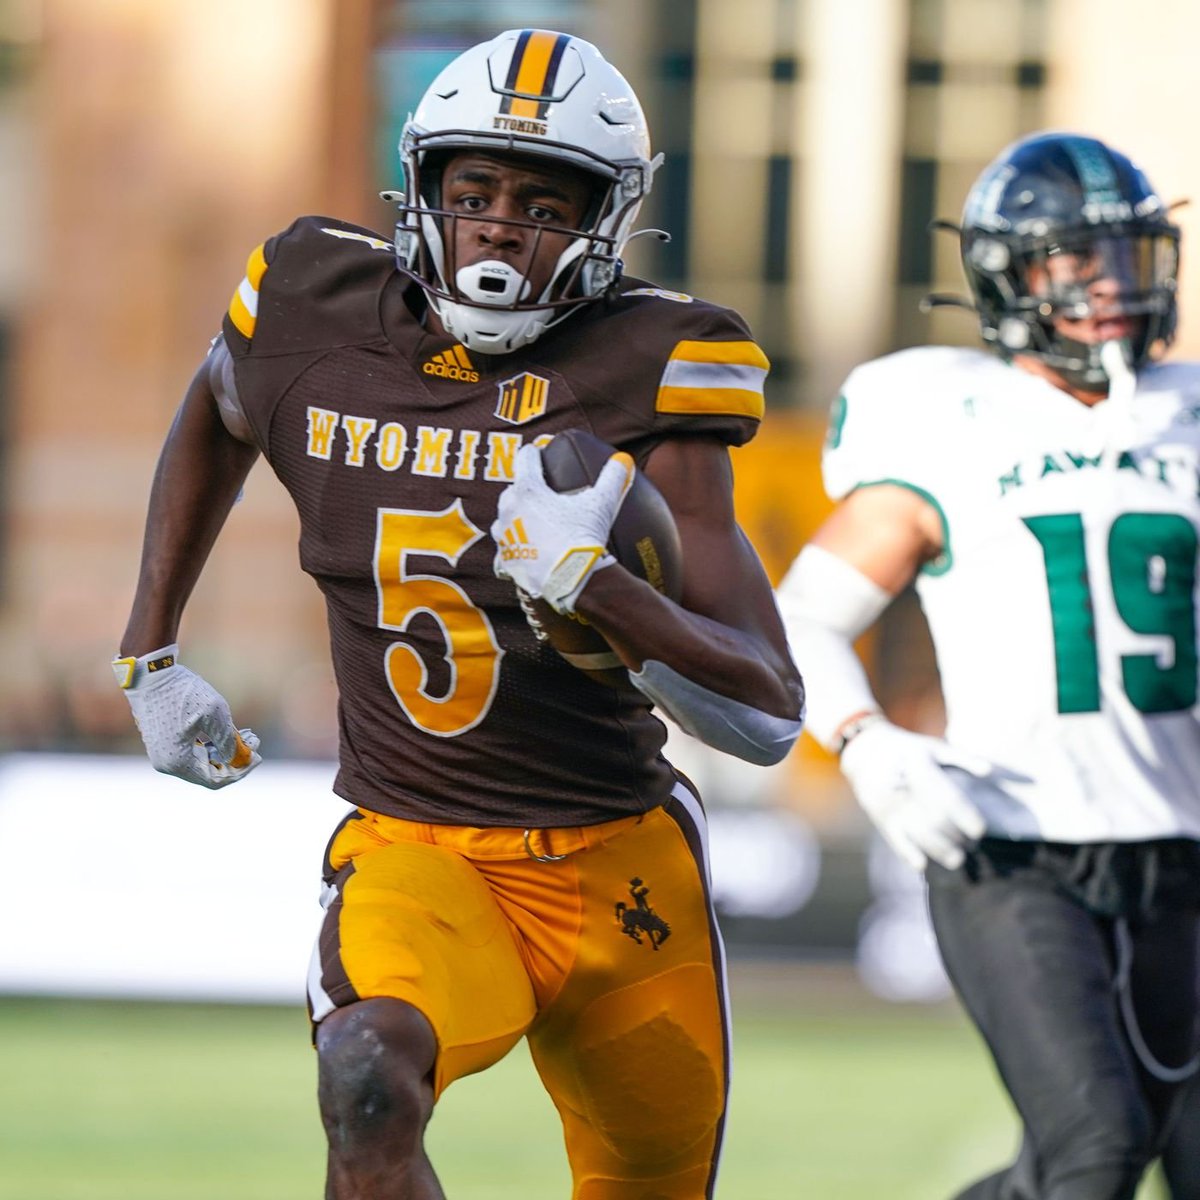 Isaiah Neyor was a monster against zone coverage for Wyoming during the 2021 season. -26 REC, 618 YDS, 10 TDs (Led FBS) -88.3 REC Grade (Led MWC) -193 YAC, 7.4 YAC/REC (3rd in MWC) -3.57 yards per route run (LED MWC) -9 contested catches (2nd in MWC)